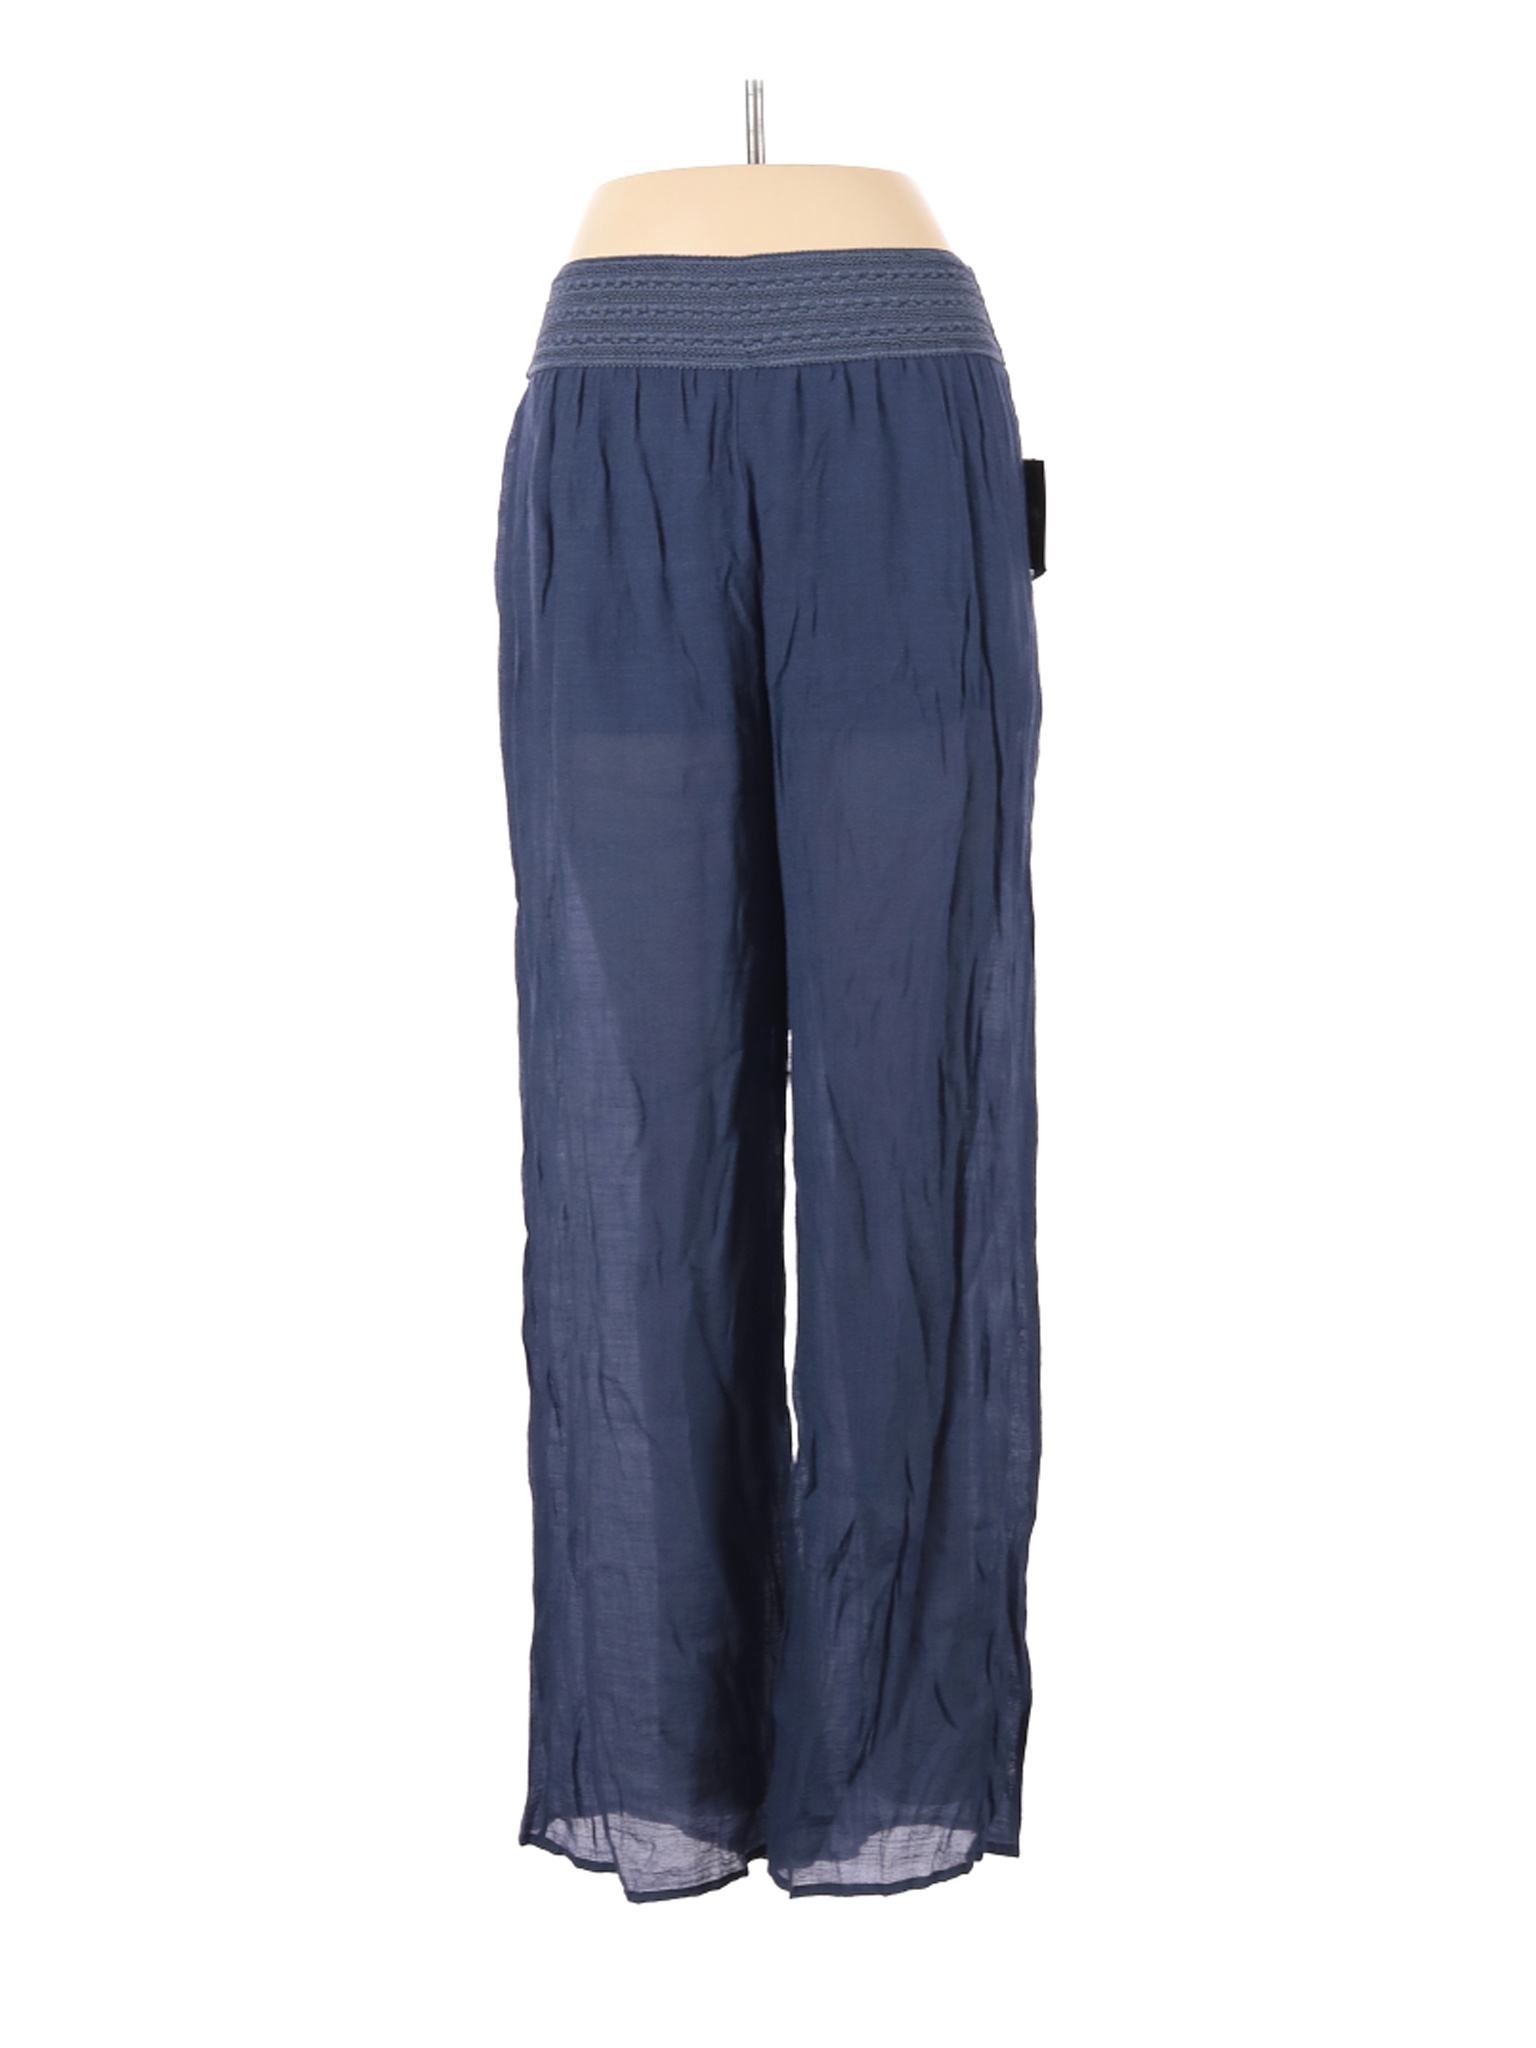 NWT By & By Women Blue Casual Pants M | eBay